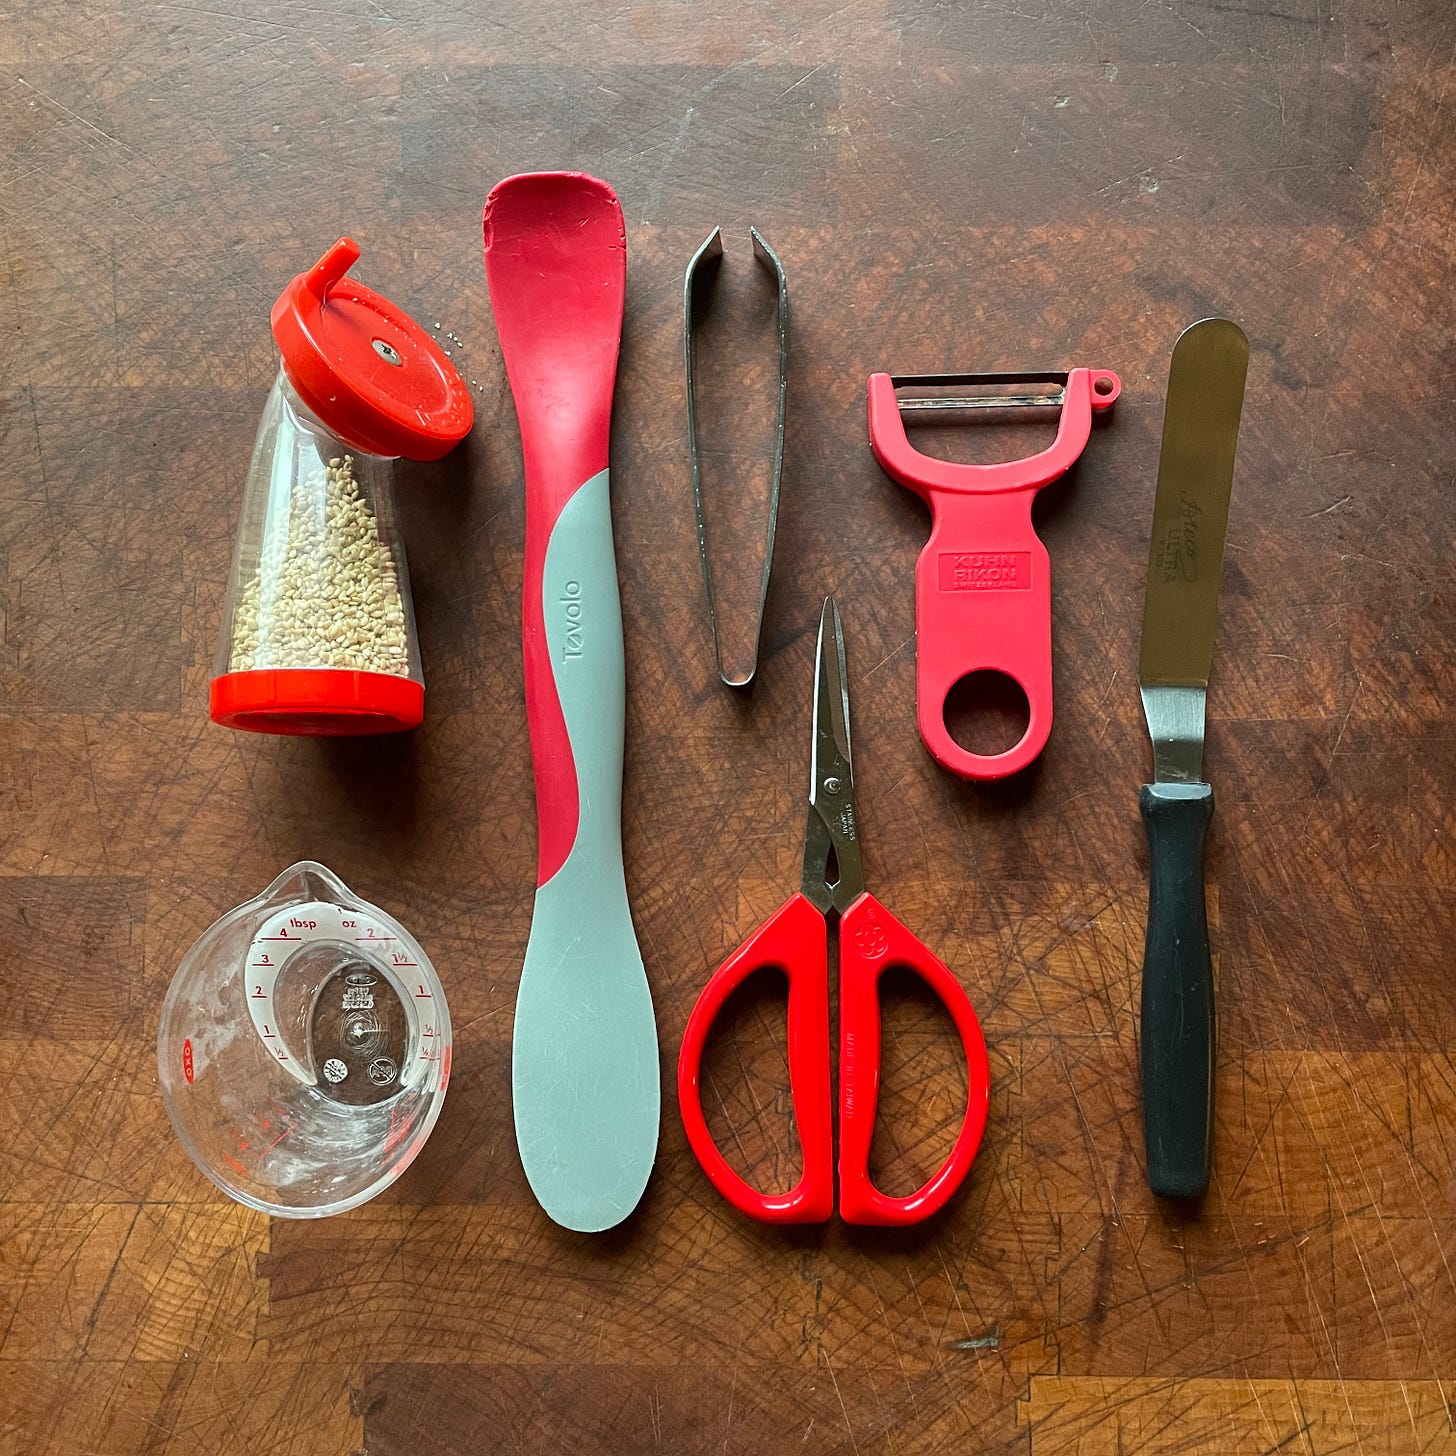 Overhead photo of small cooking tools including a 1/4-cup plastic measuring cup, a jar scraper, a sesame seed grinder, a small pair of red-handled scissors, fish tweezers, a red vegetable peeler, and a small offset spatula with a black plastic handle